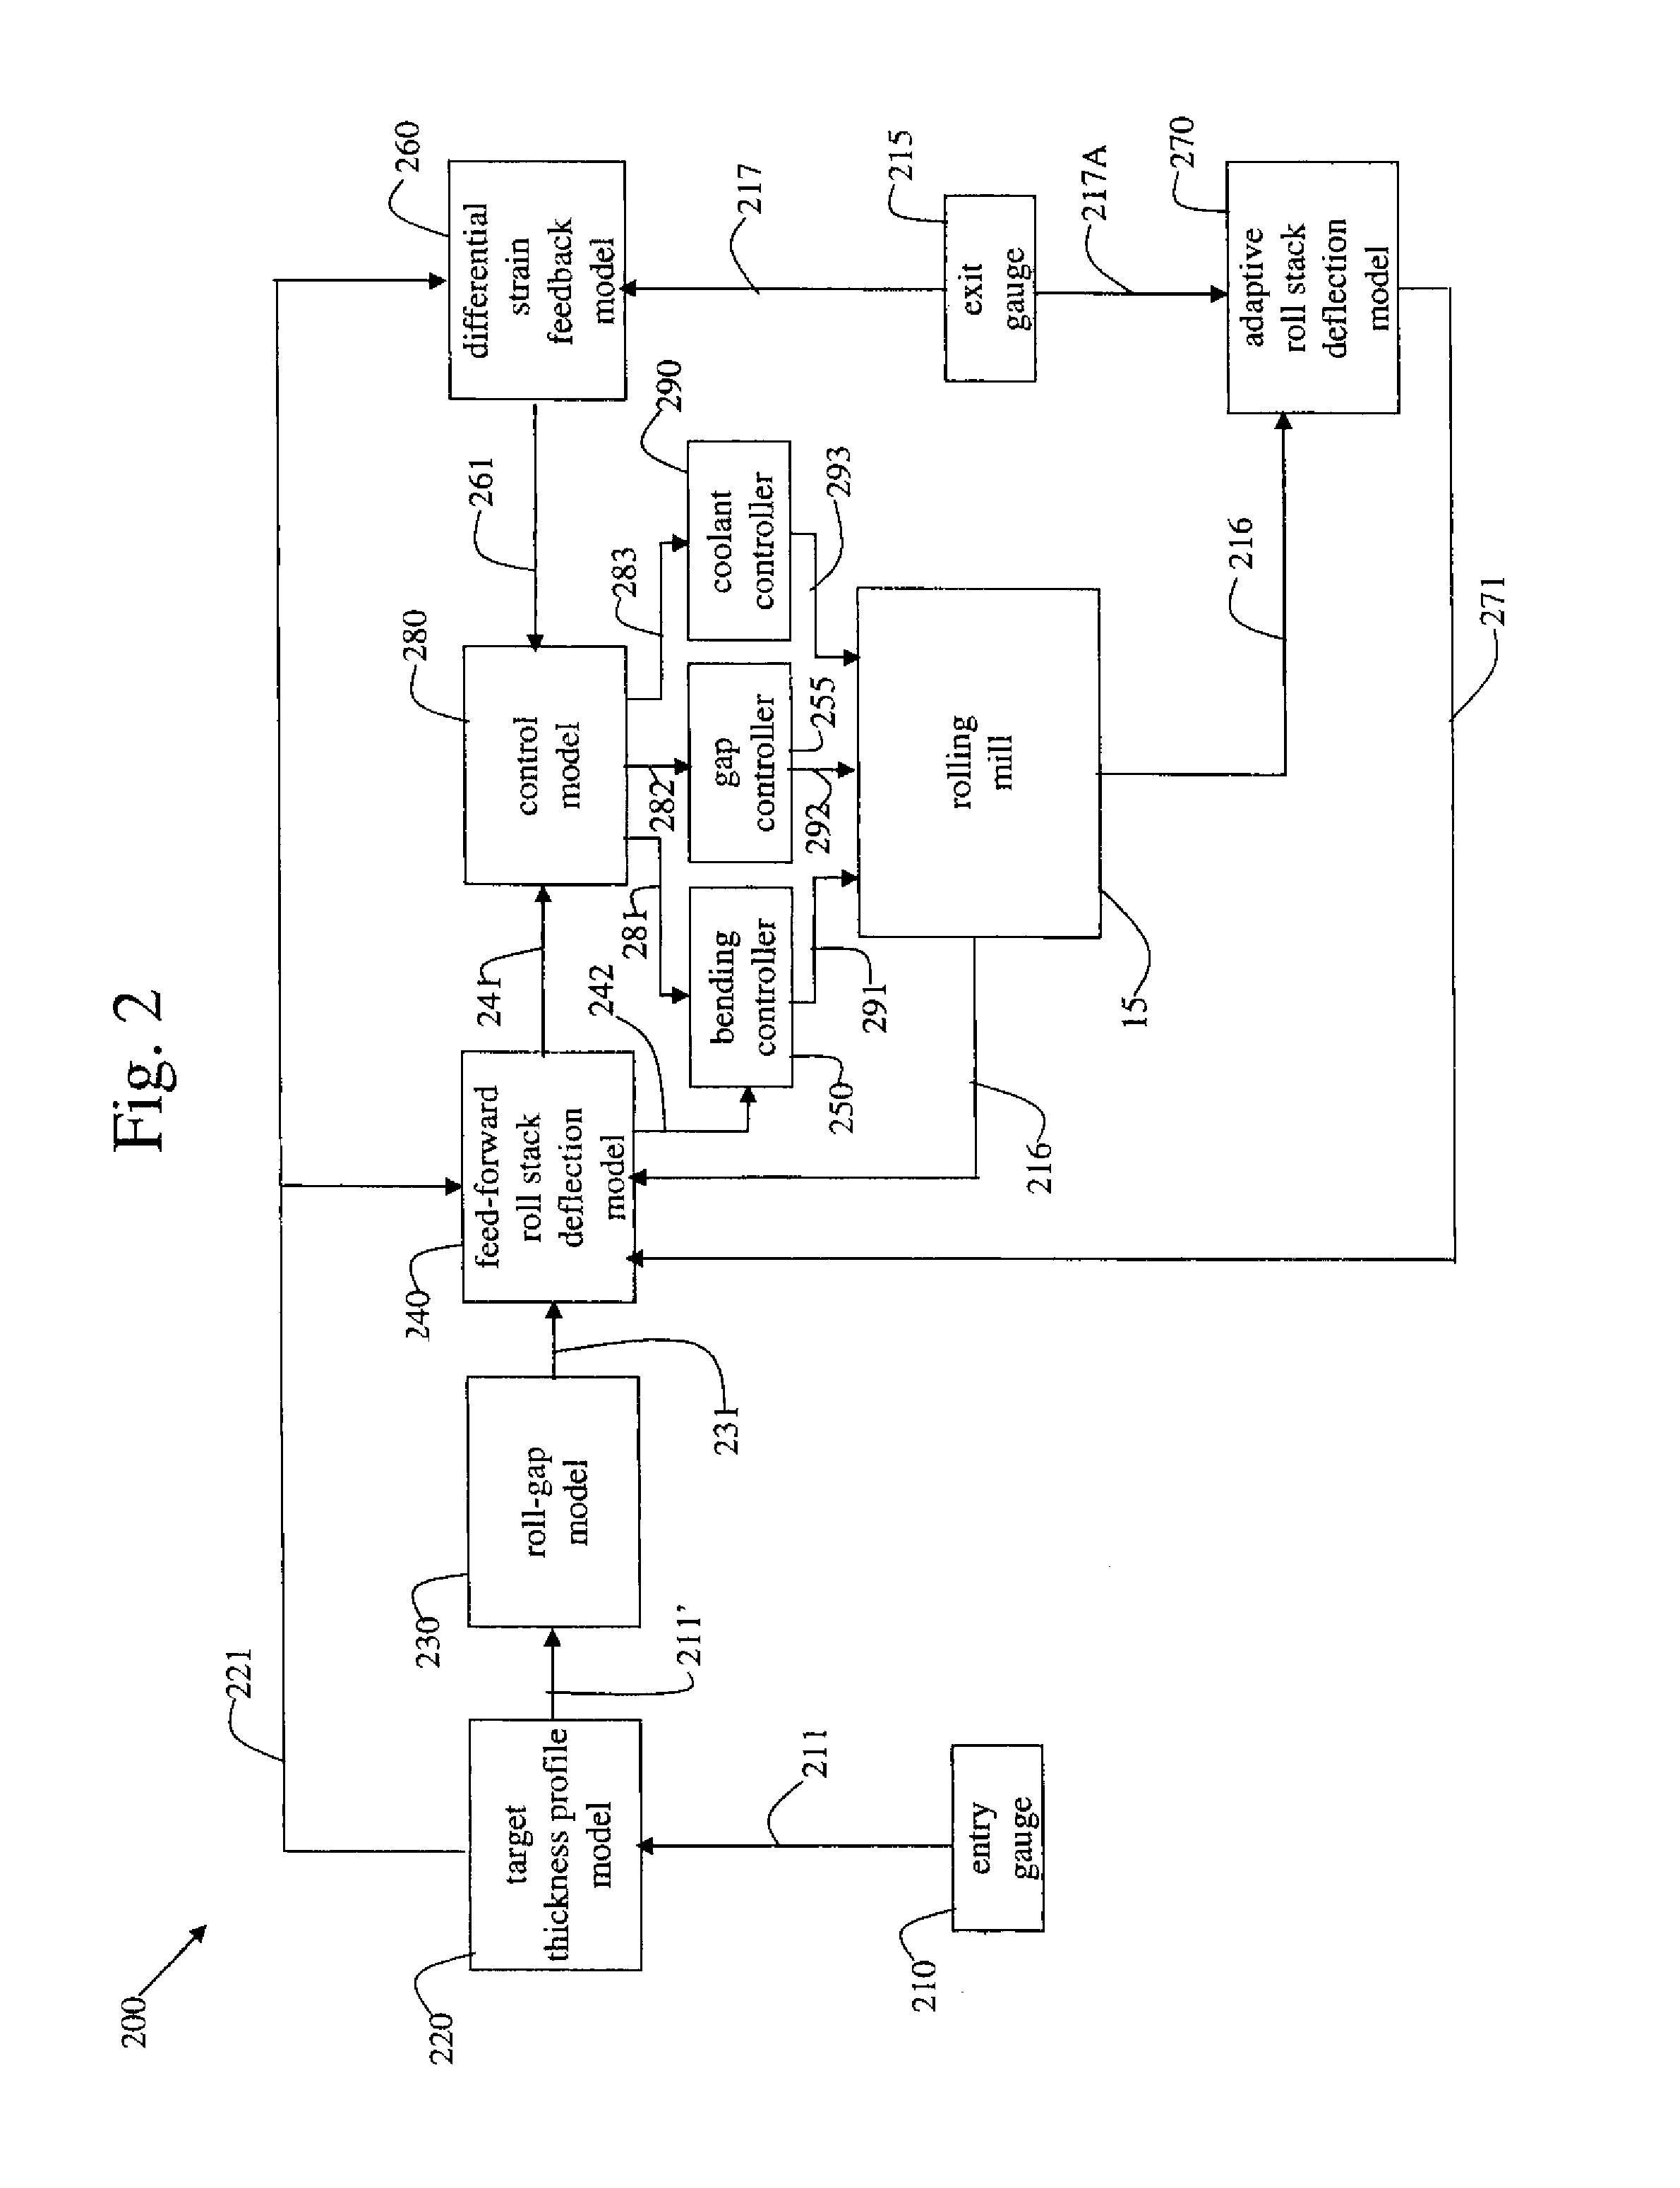 Method and plant for integrated monitoring and control of strip flatness and strip profile